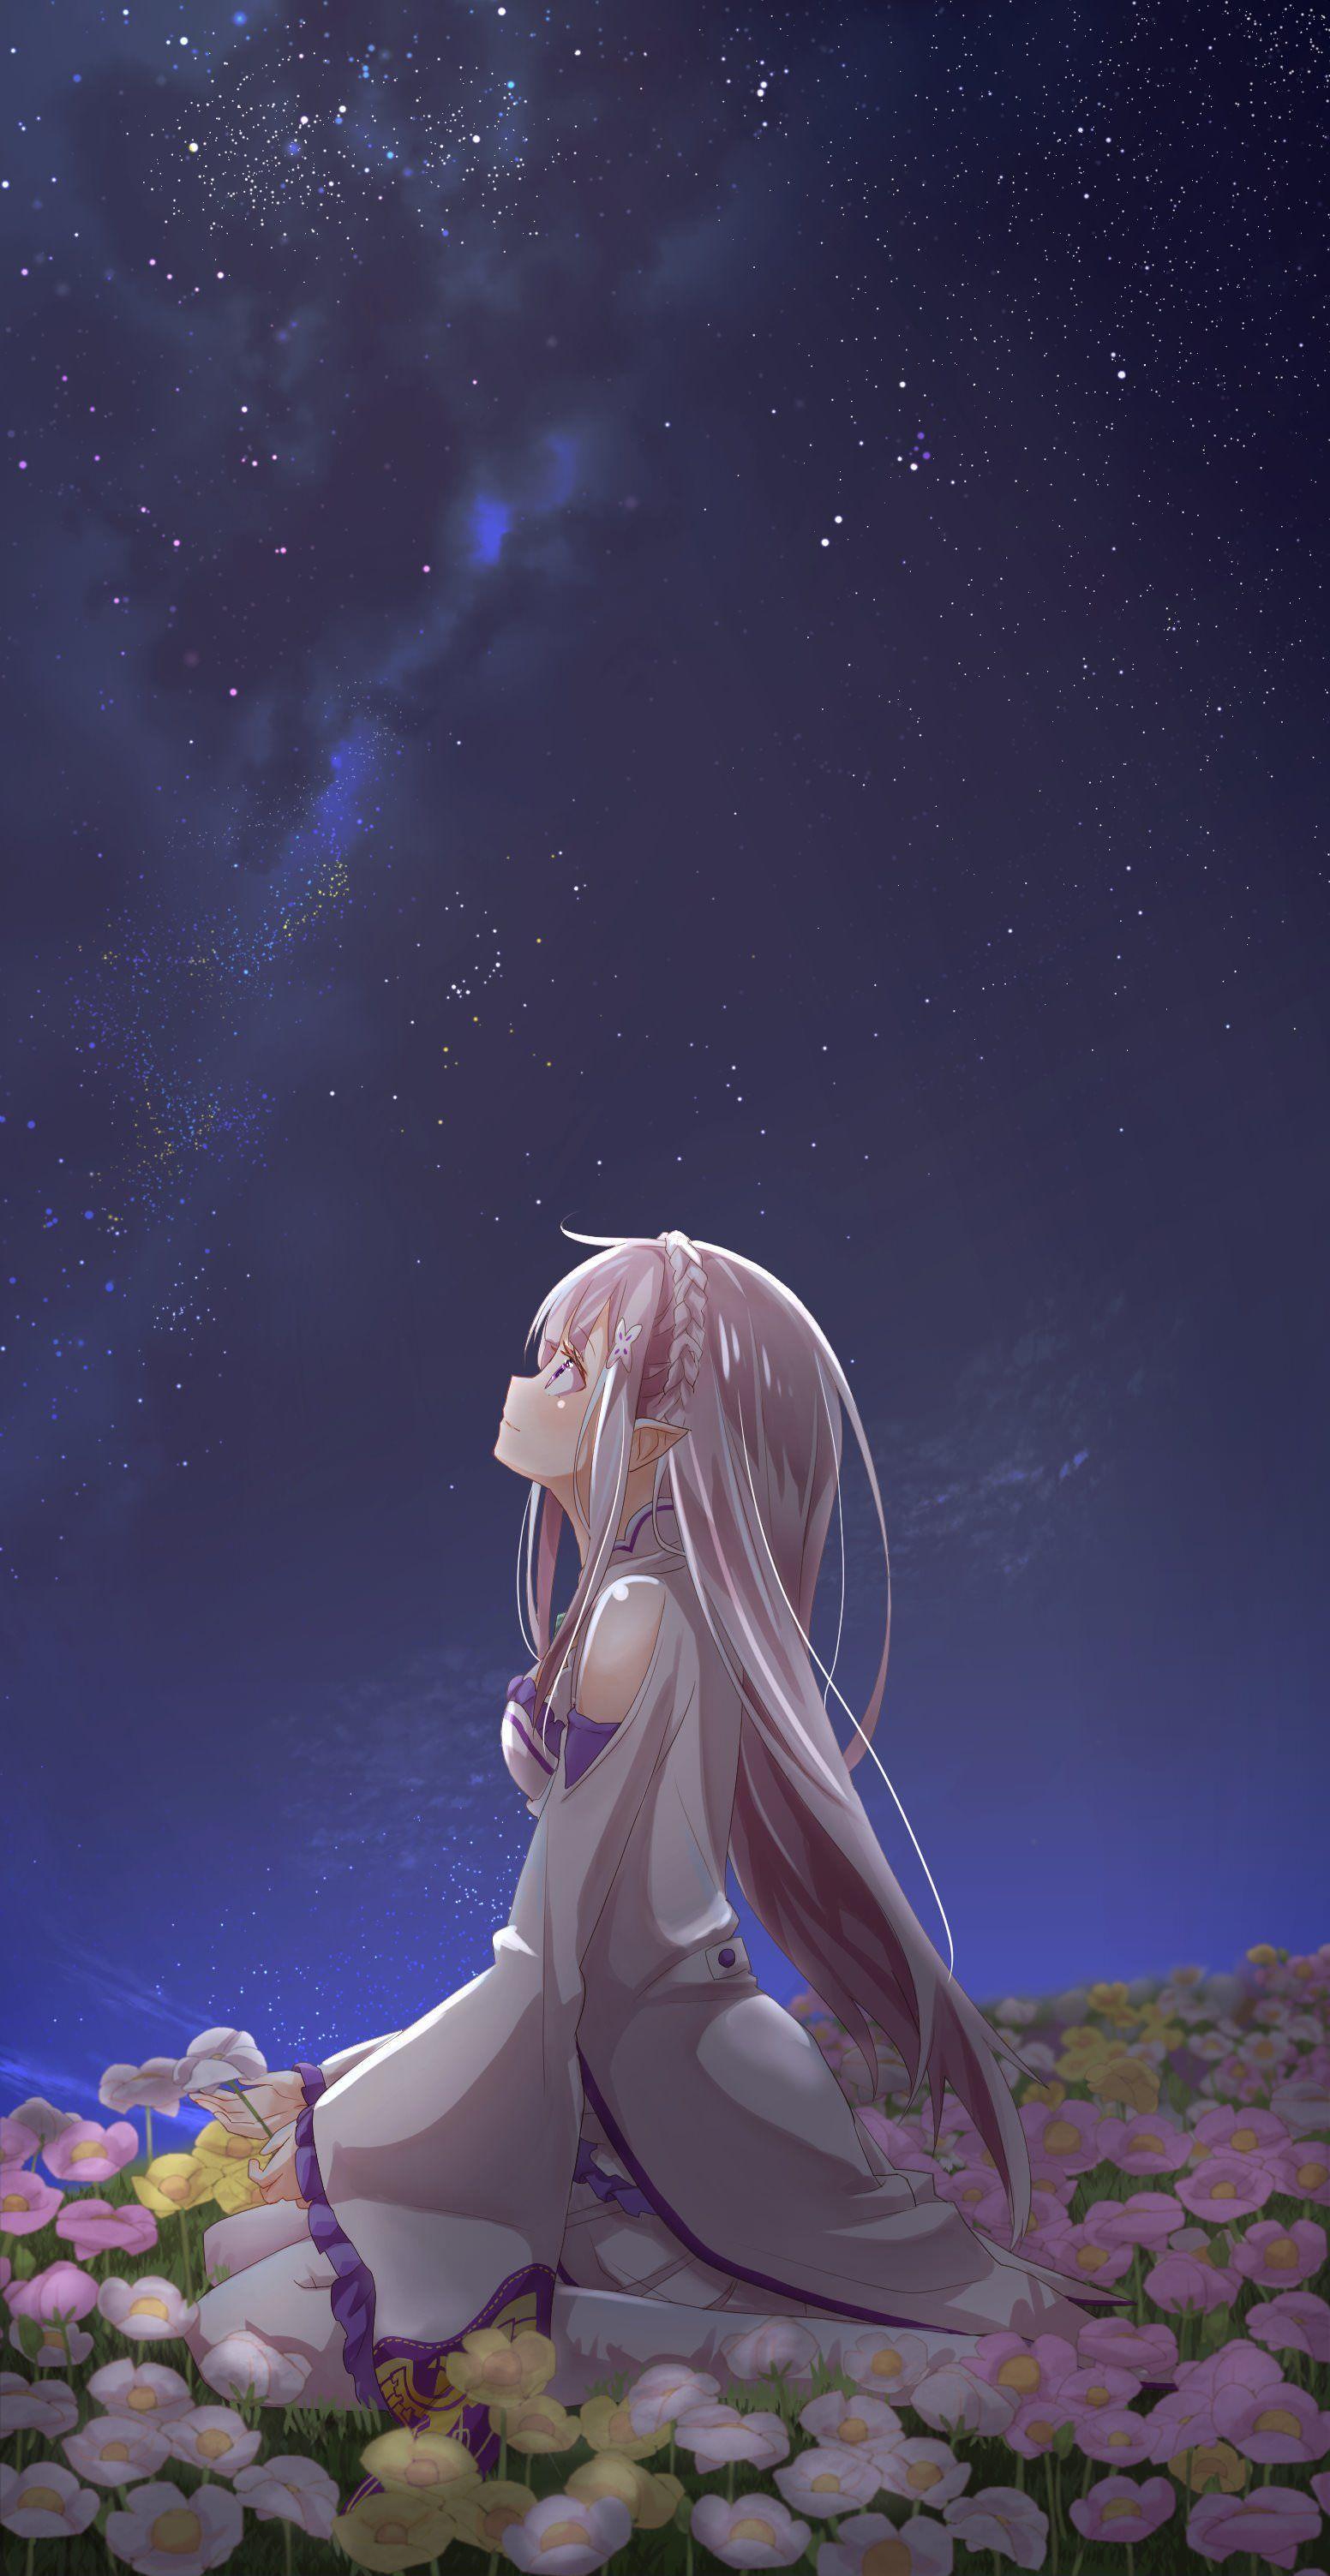 Sad Anime Wallpaper with quote